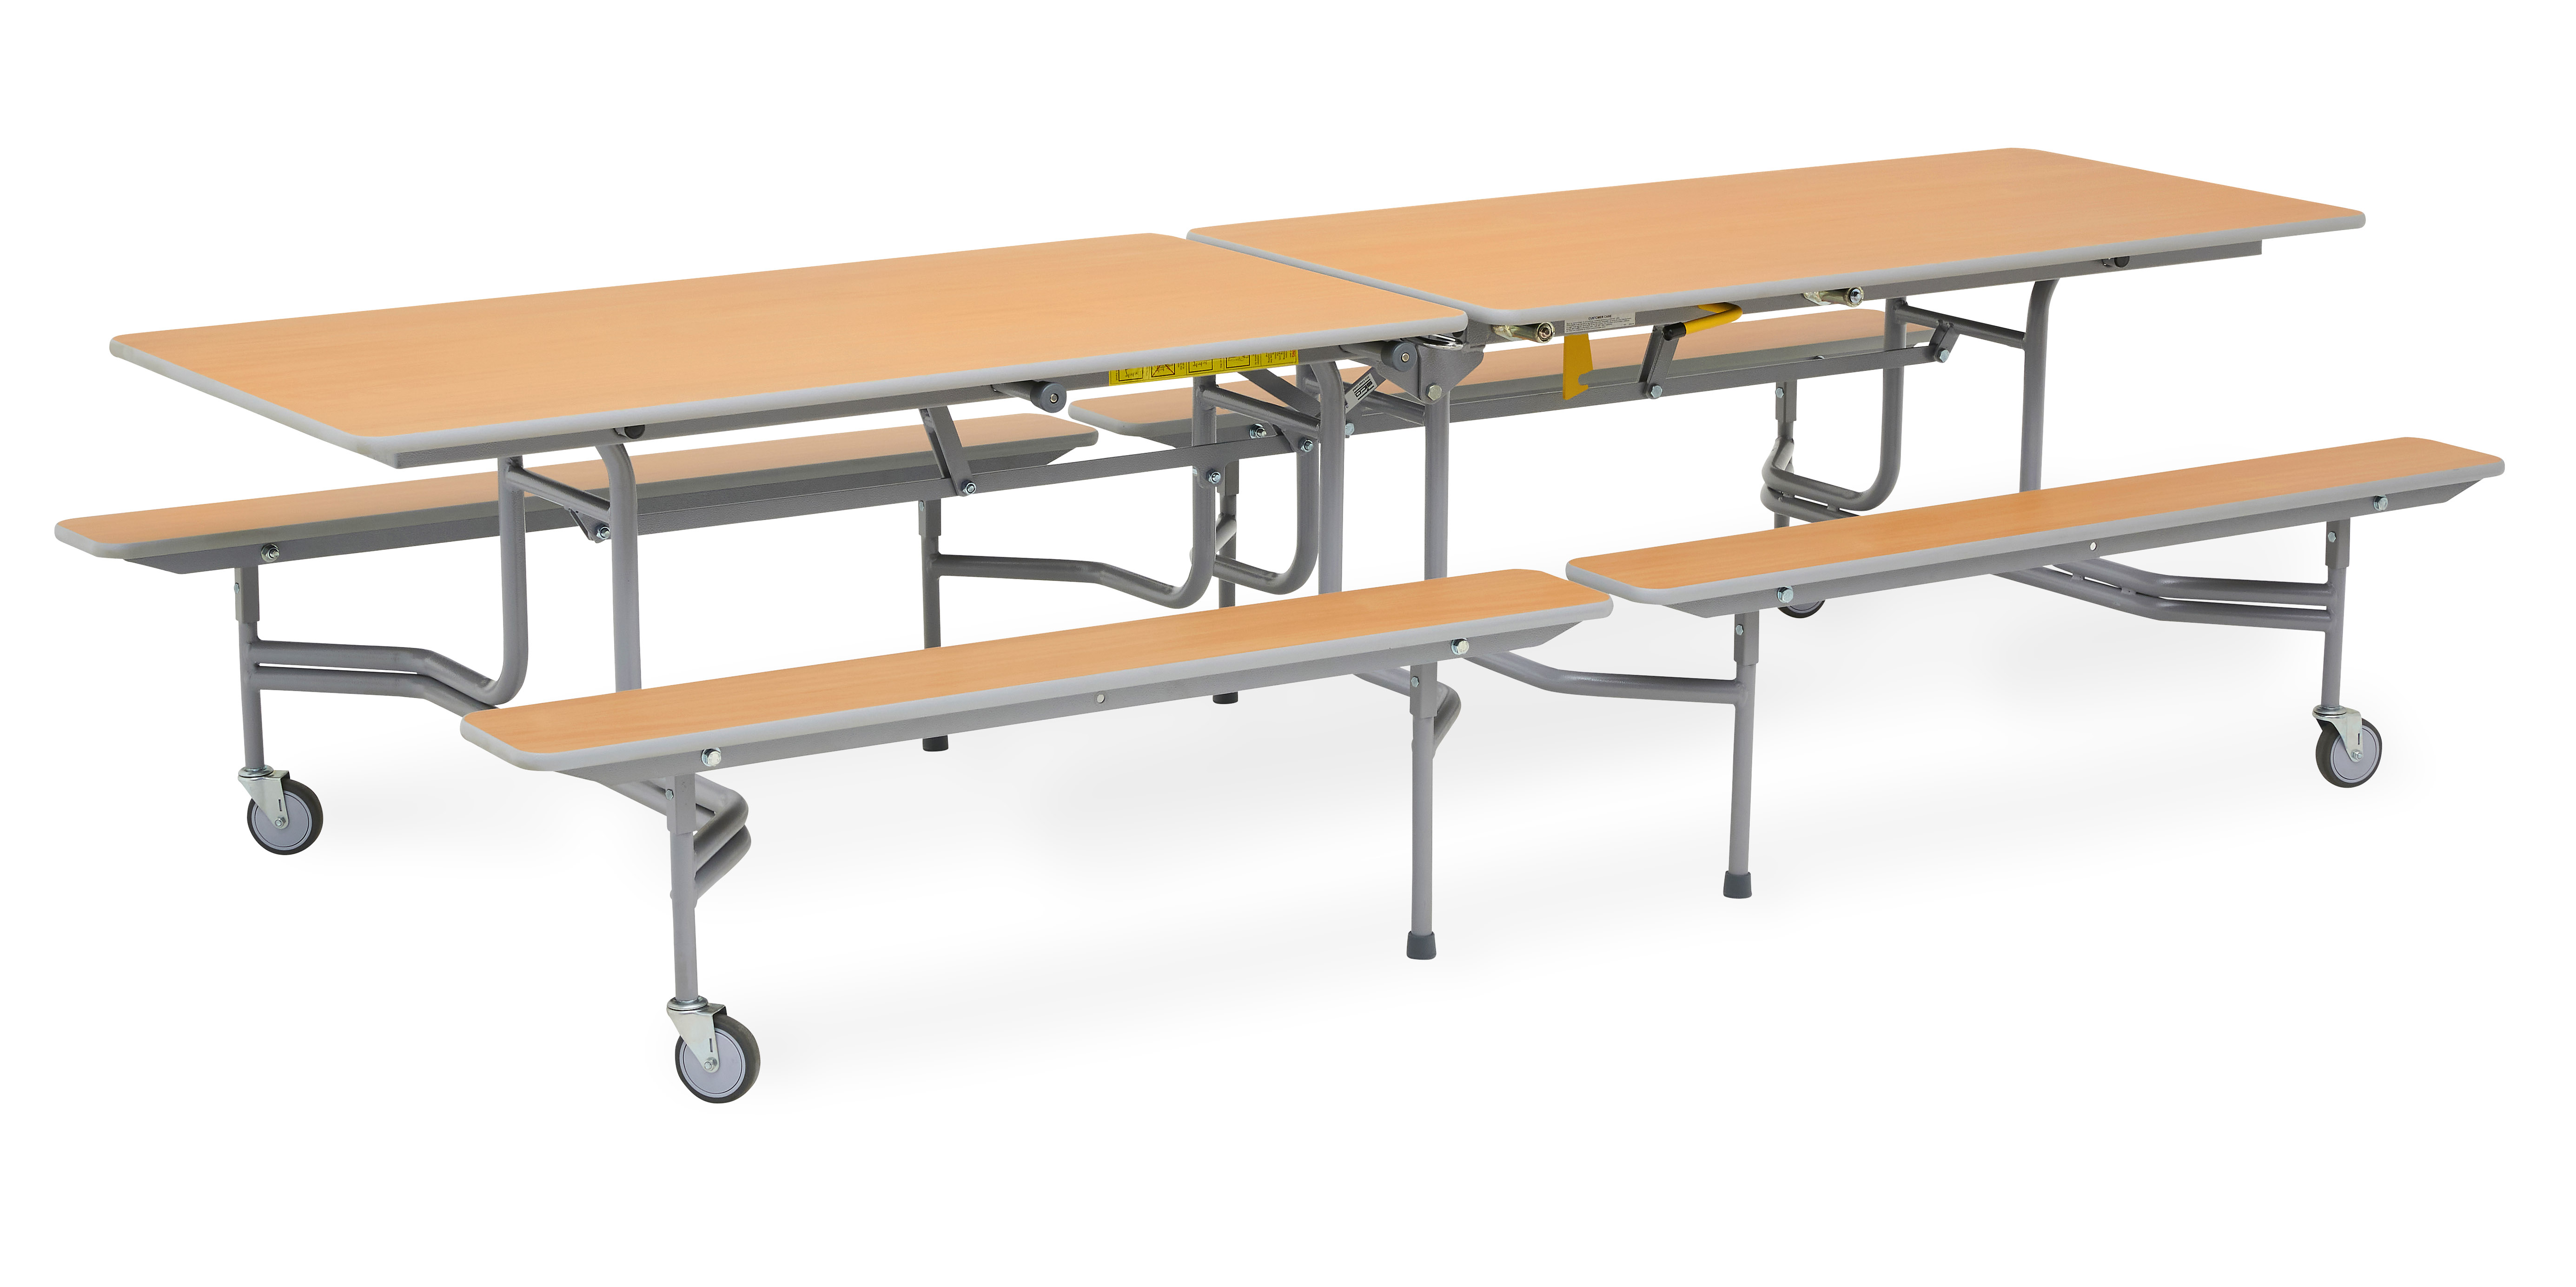 TTX13 Rect Bench Table Blue 8-10